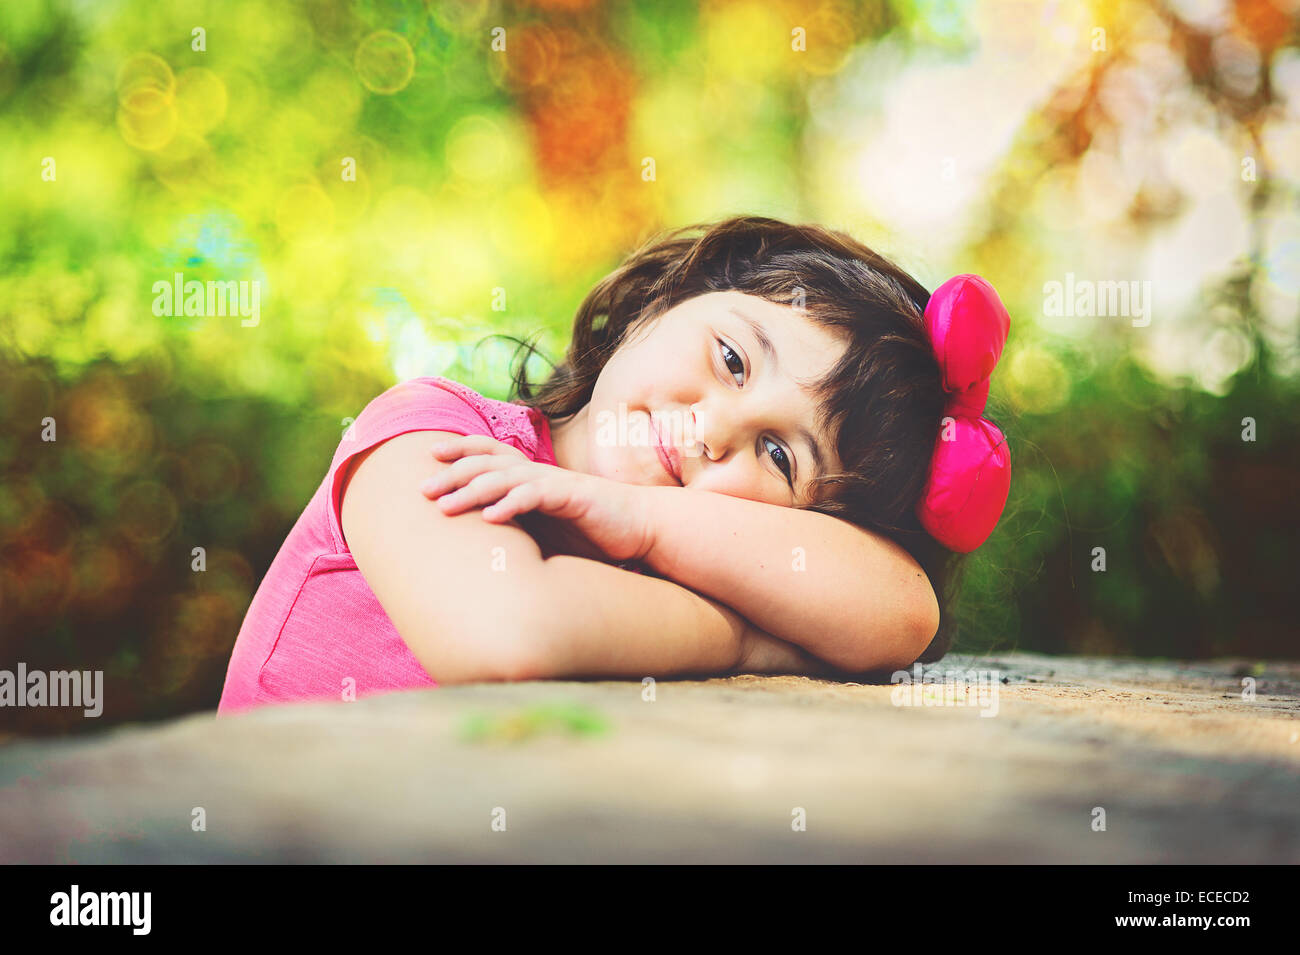 Portrait of girl wearing pink t-shirt and hair bow Stock Photo